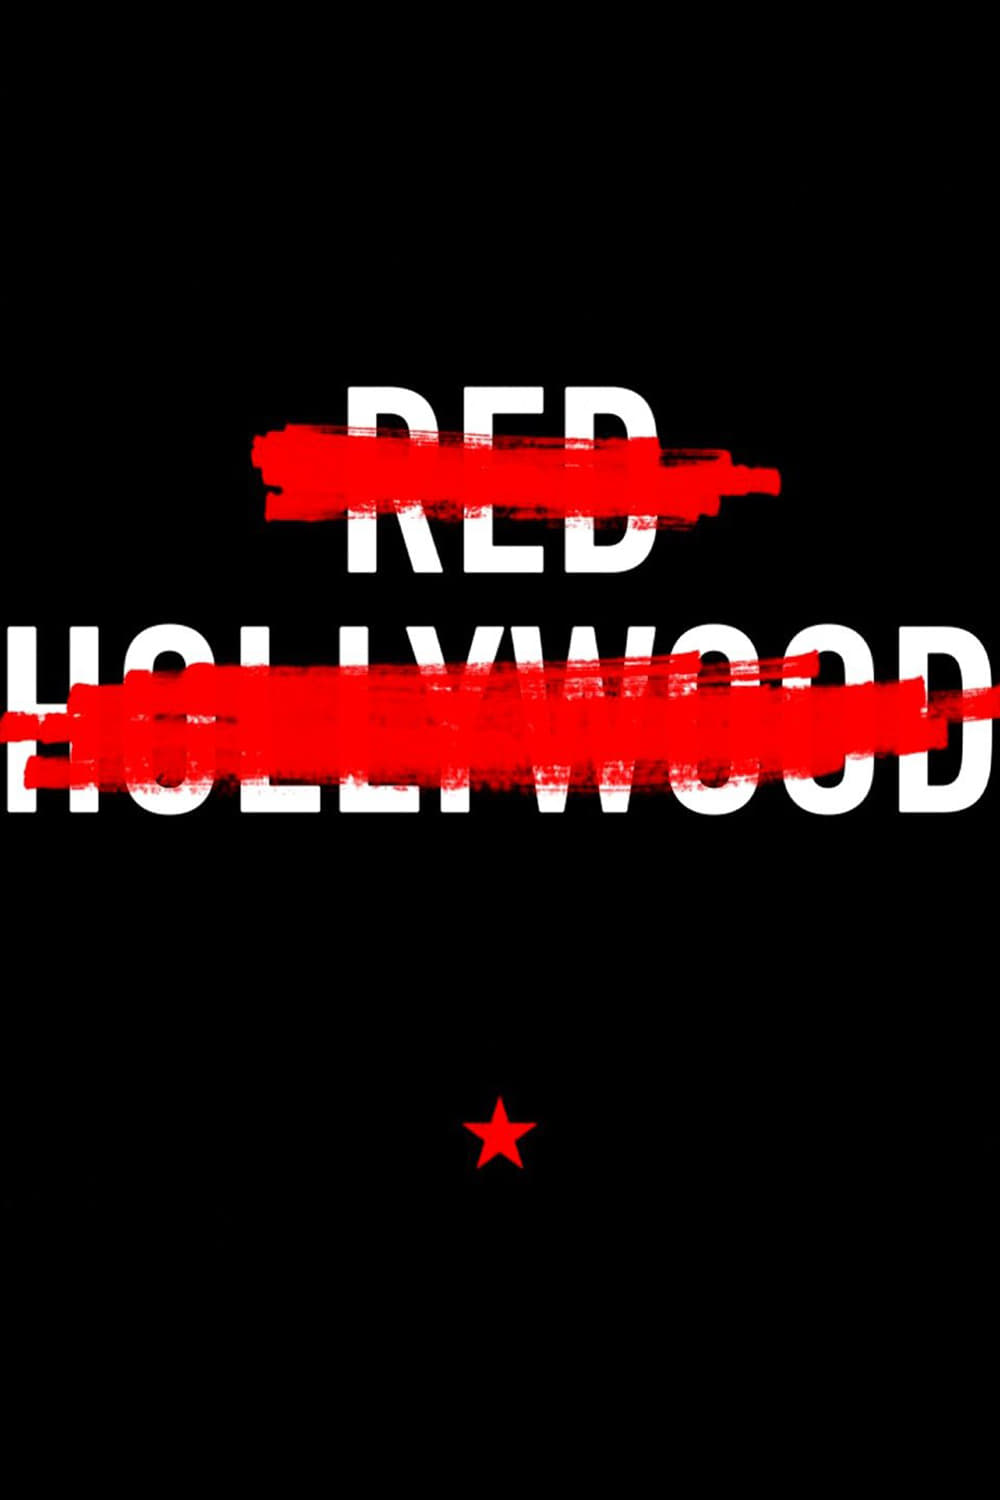 RED HOLLYWOOD